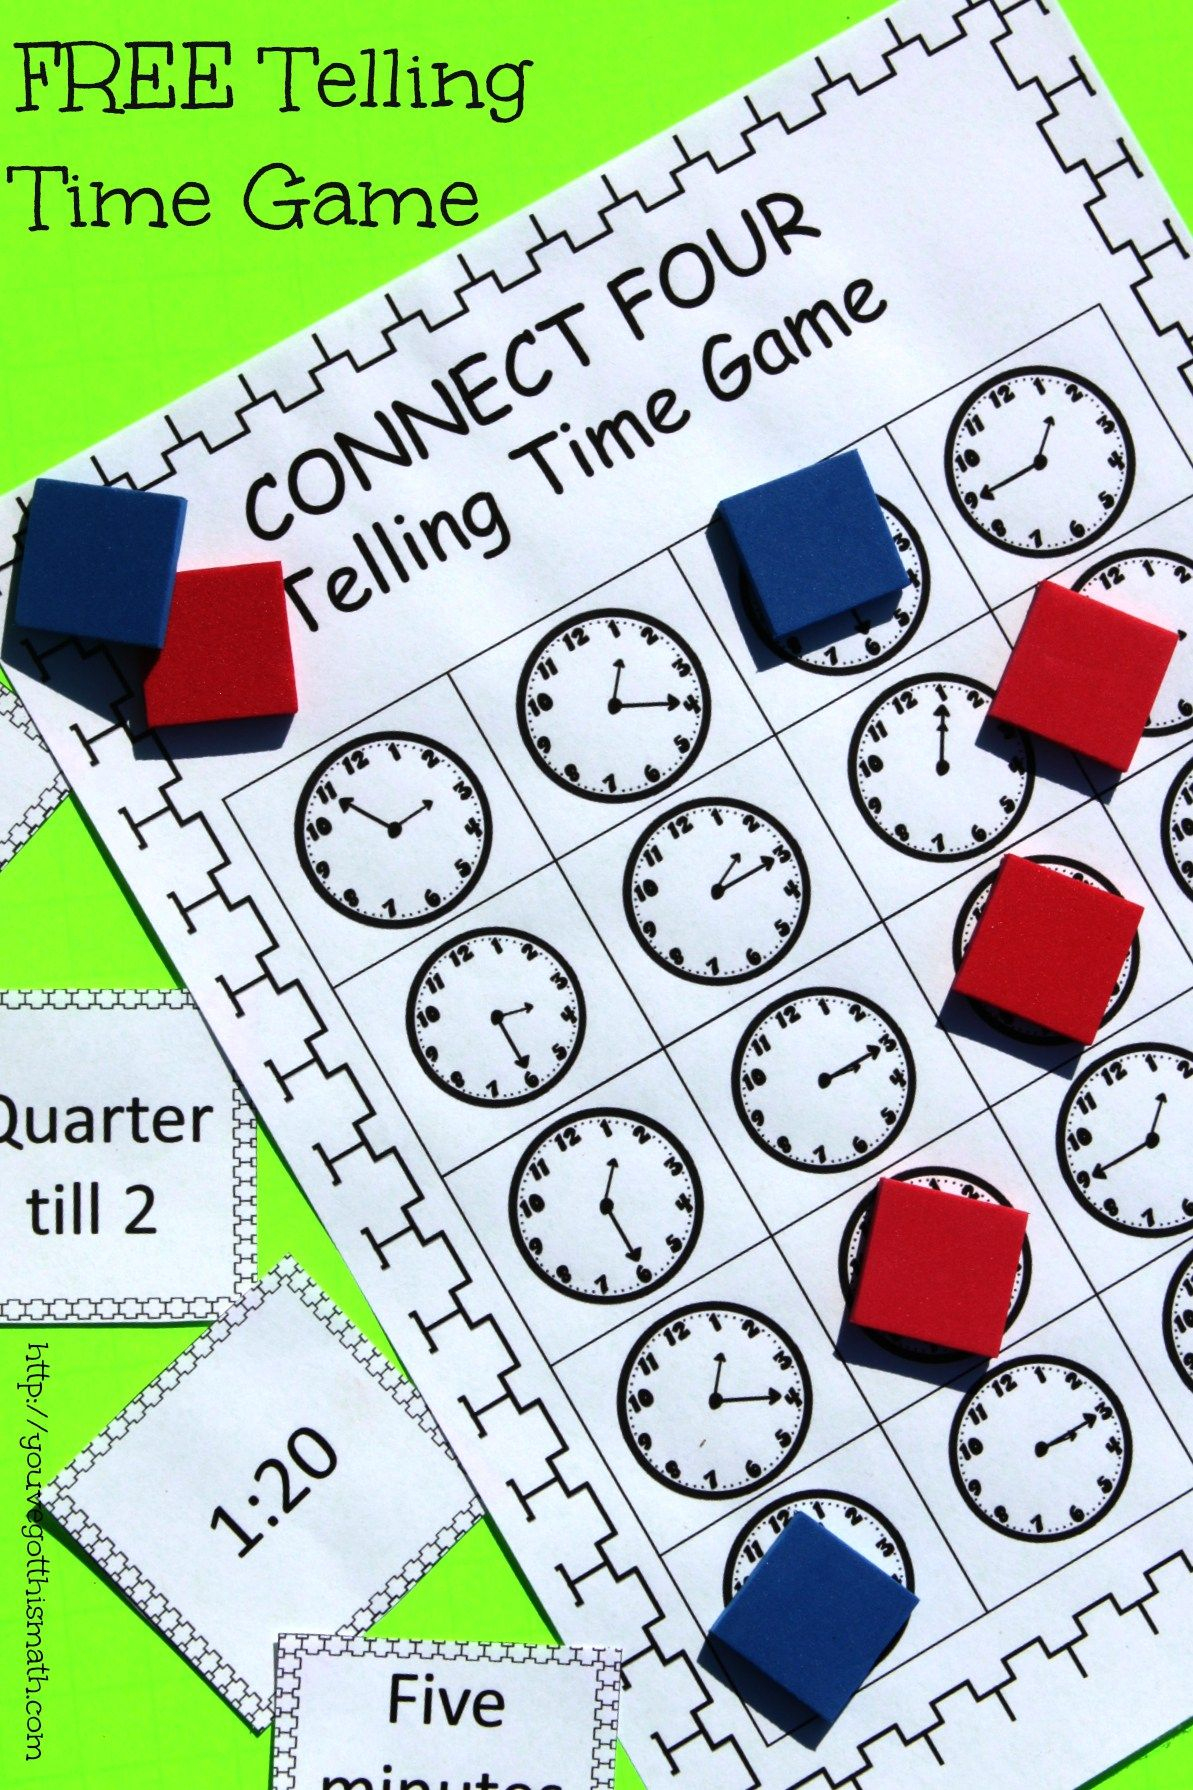 How To Practice Telling Time With A Fun, Easy Game | Telling